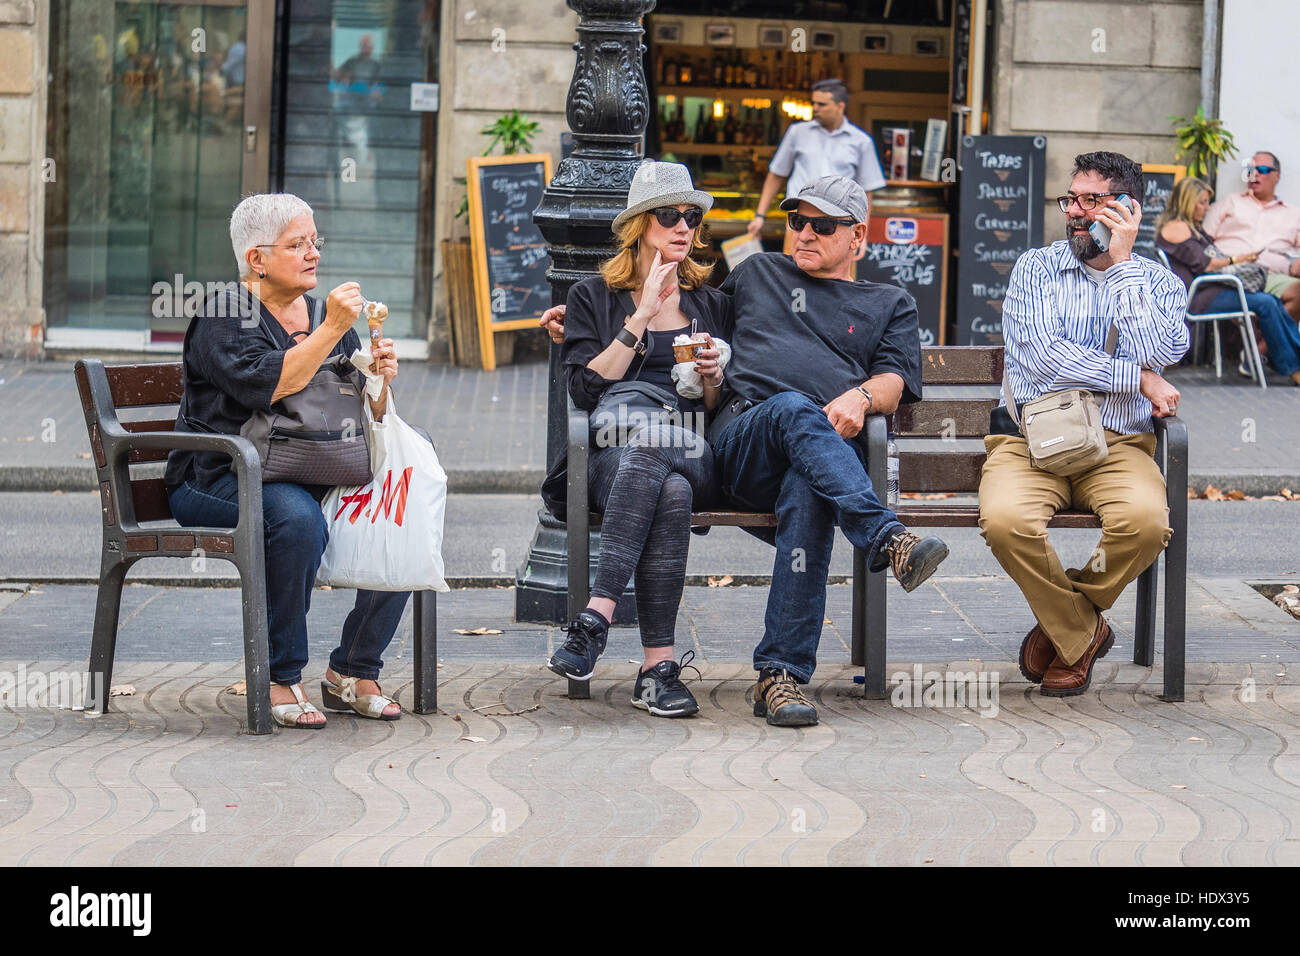 A group of four people sitting in public seating on Las Ramblas in Barcelona, Spain. Stock Photo